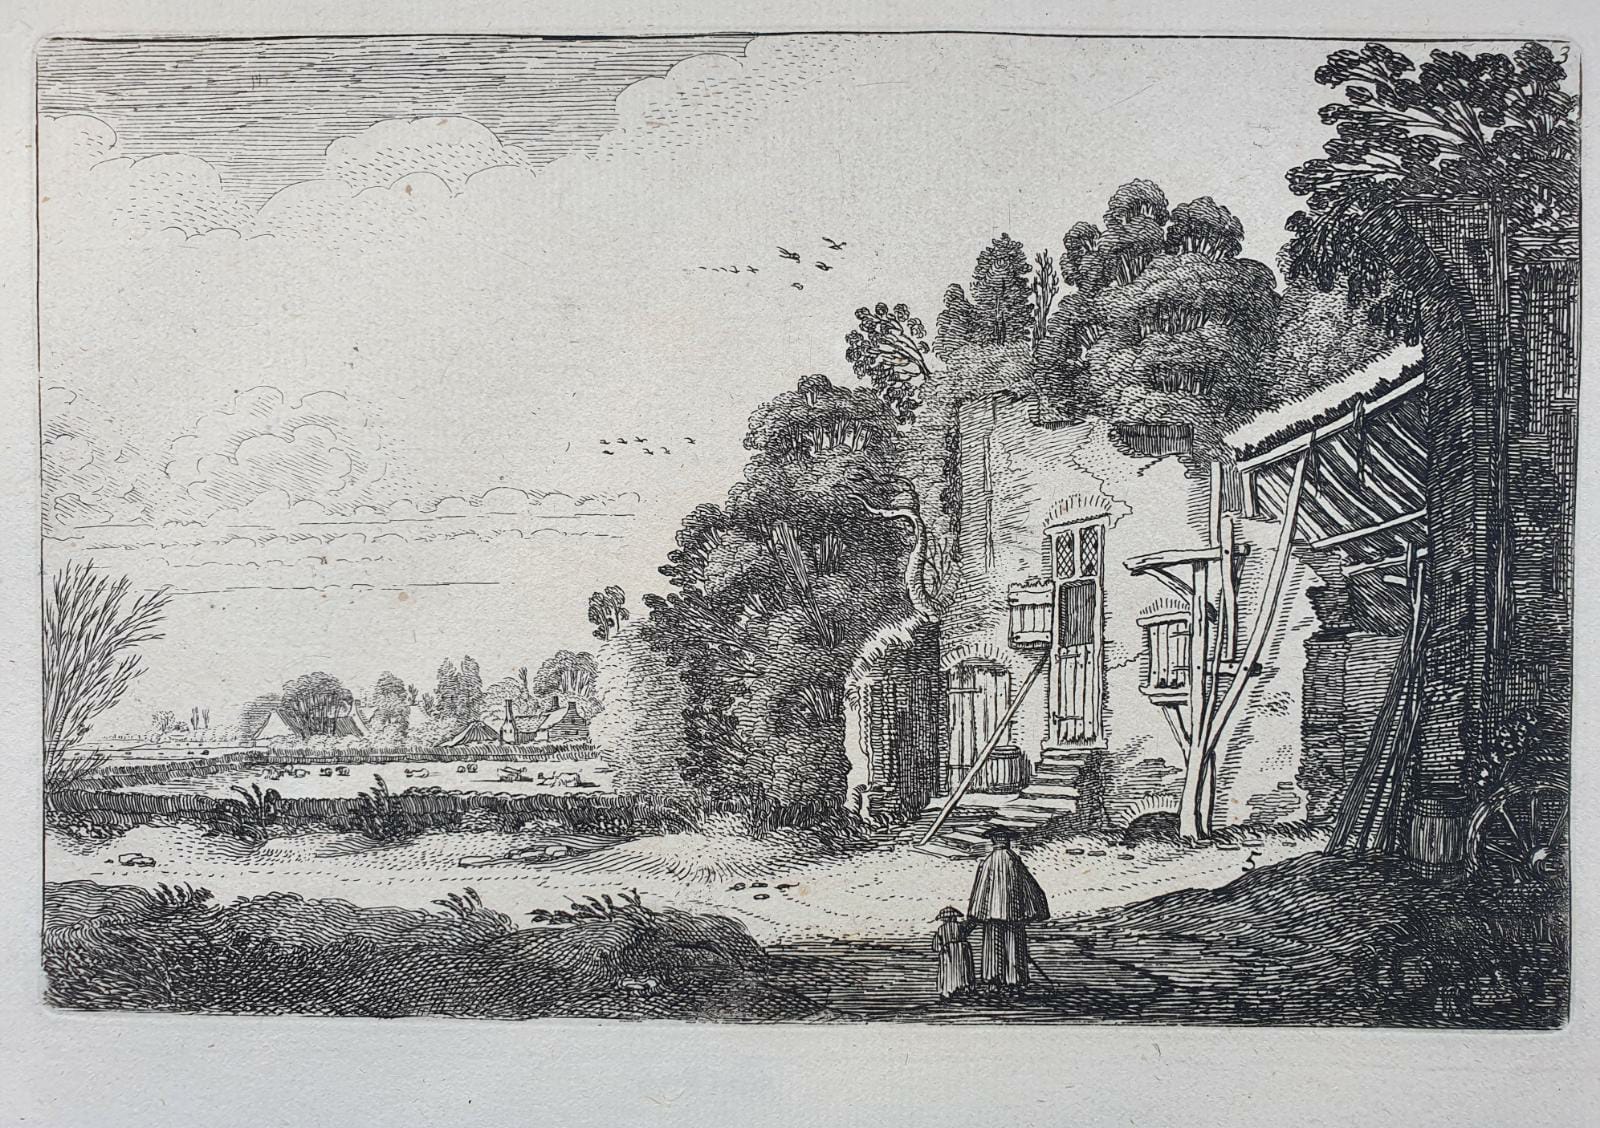 [Antique etching, ets, landscape print] J. v.d. Velde II, Woman with child by a ruined house, publisdhed before 1713.